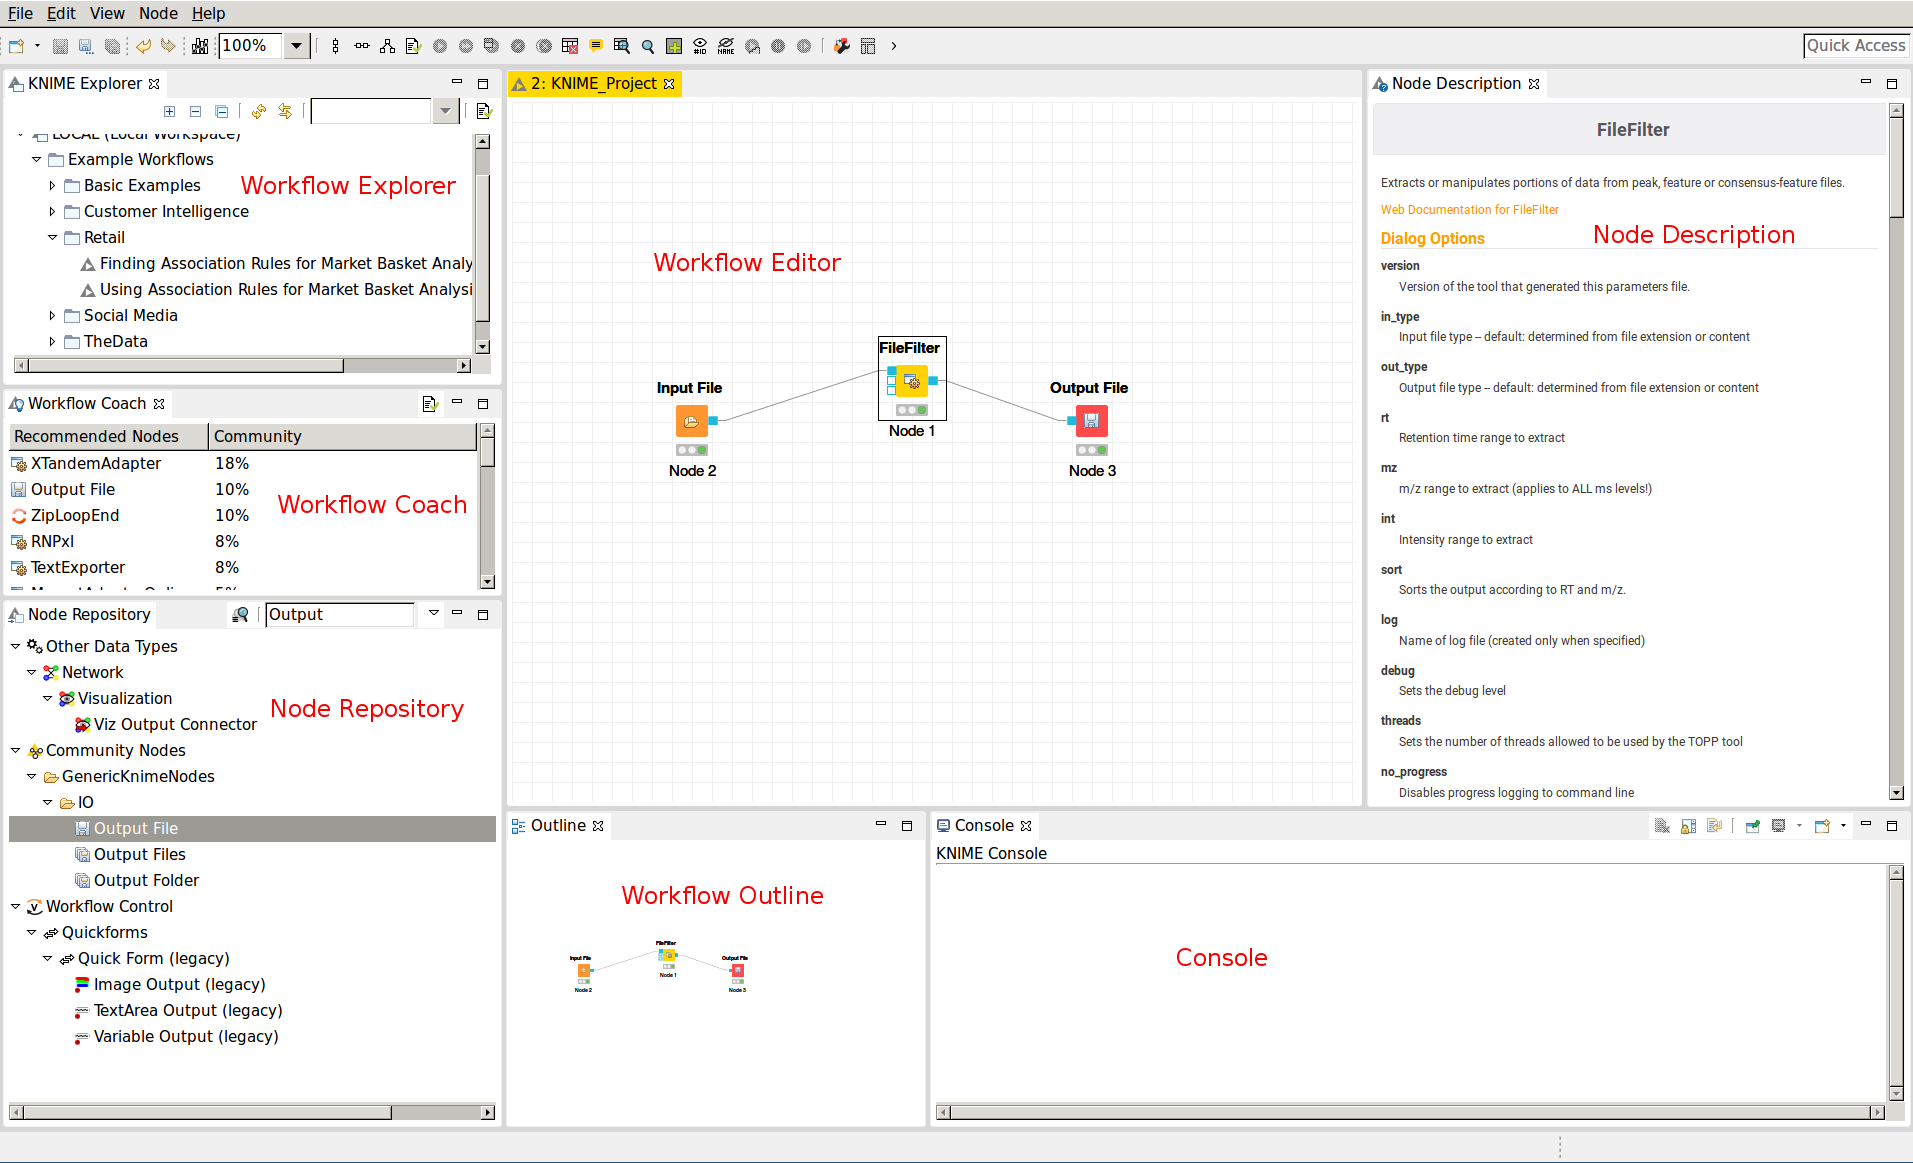 The KNIME workbench